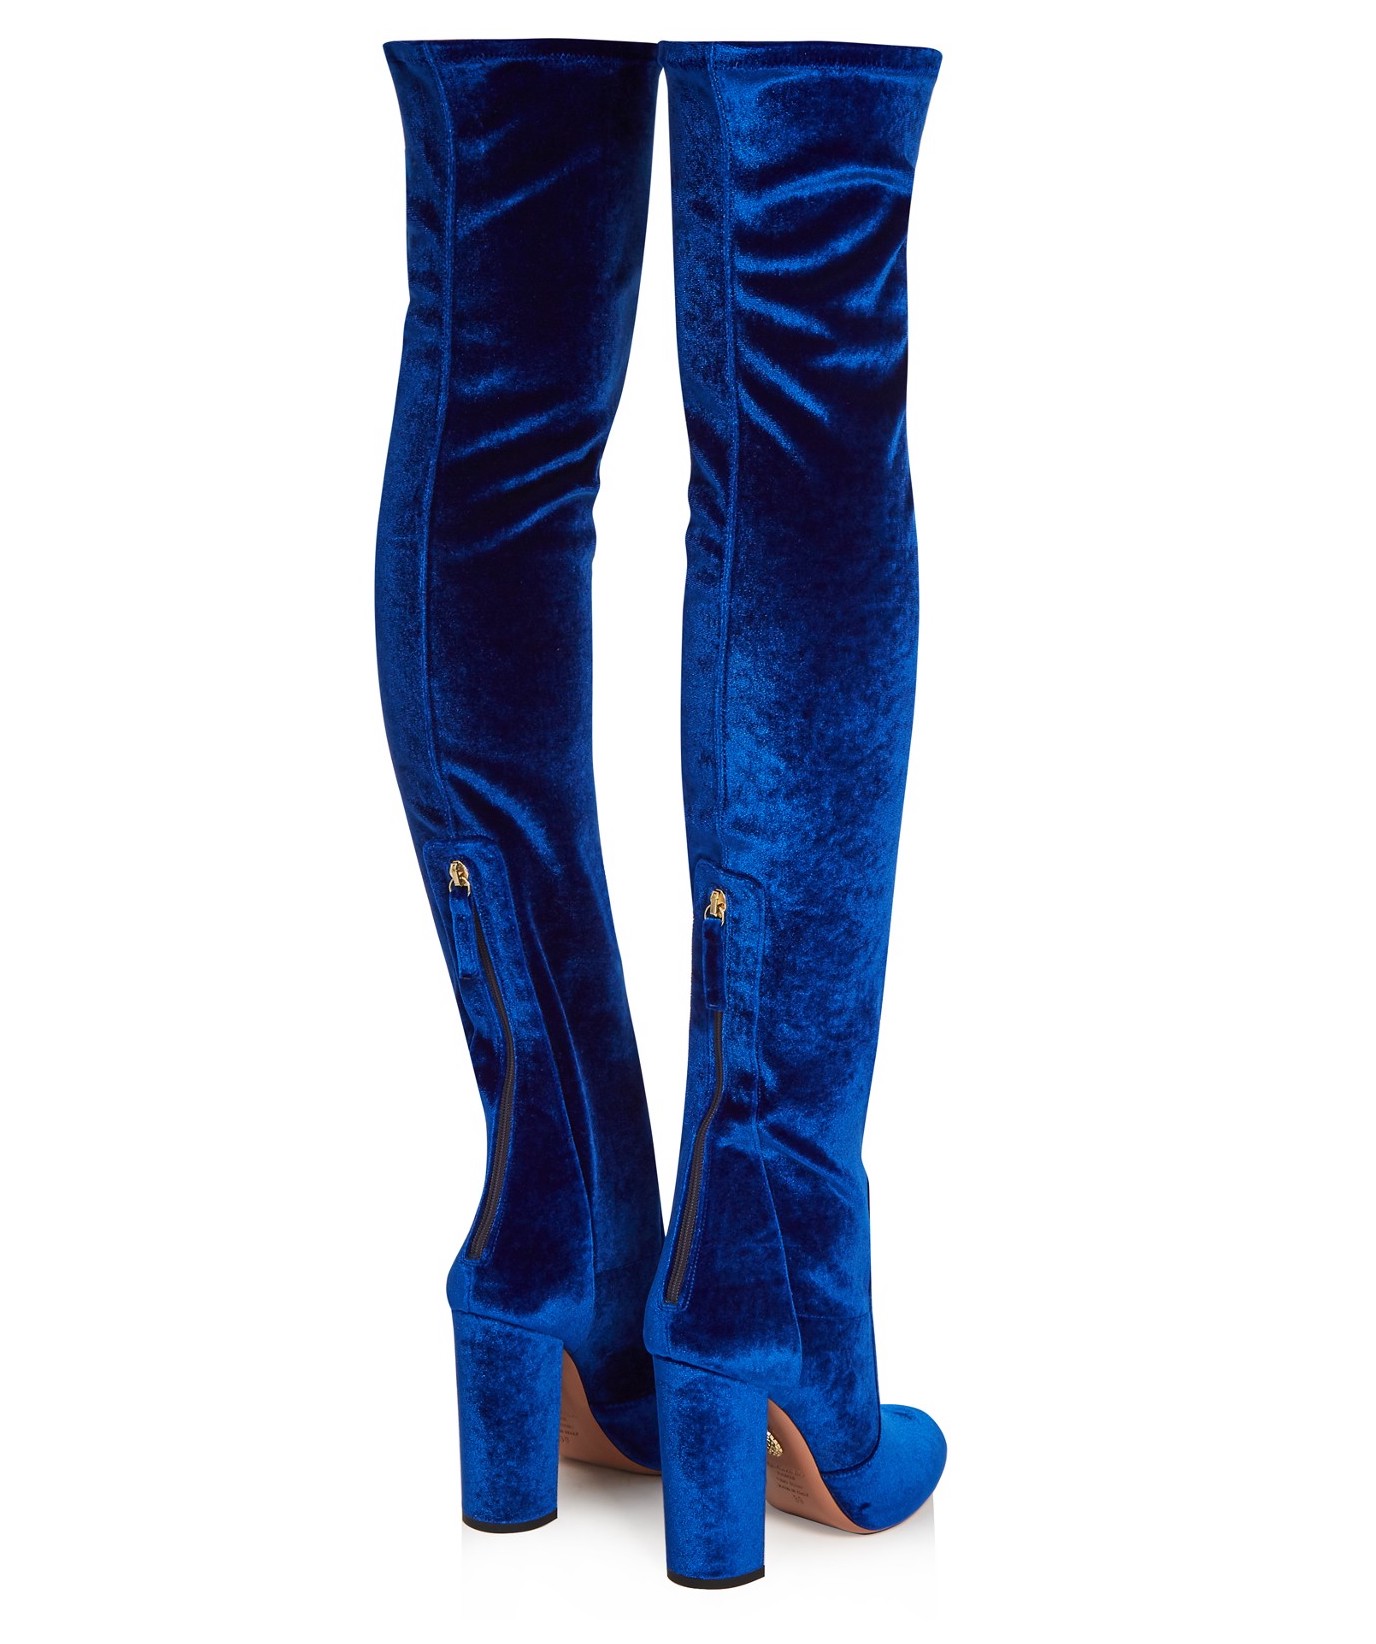 blue over the knee boot